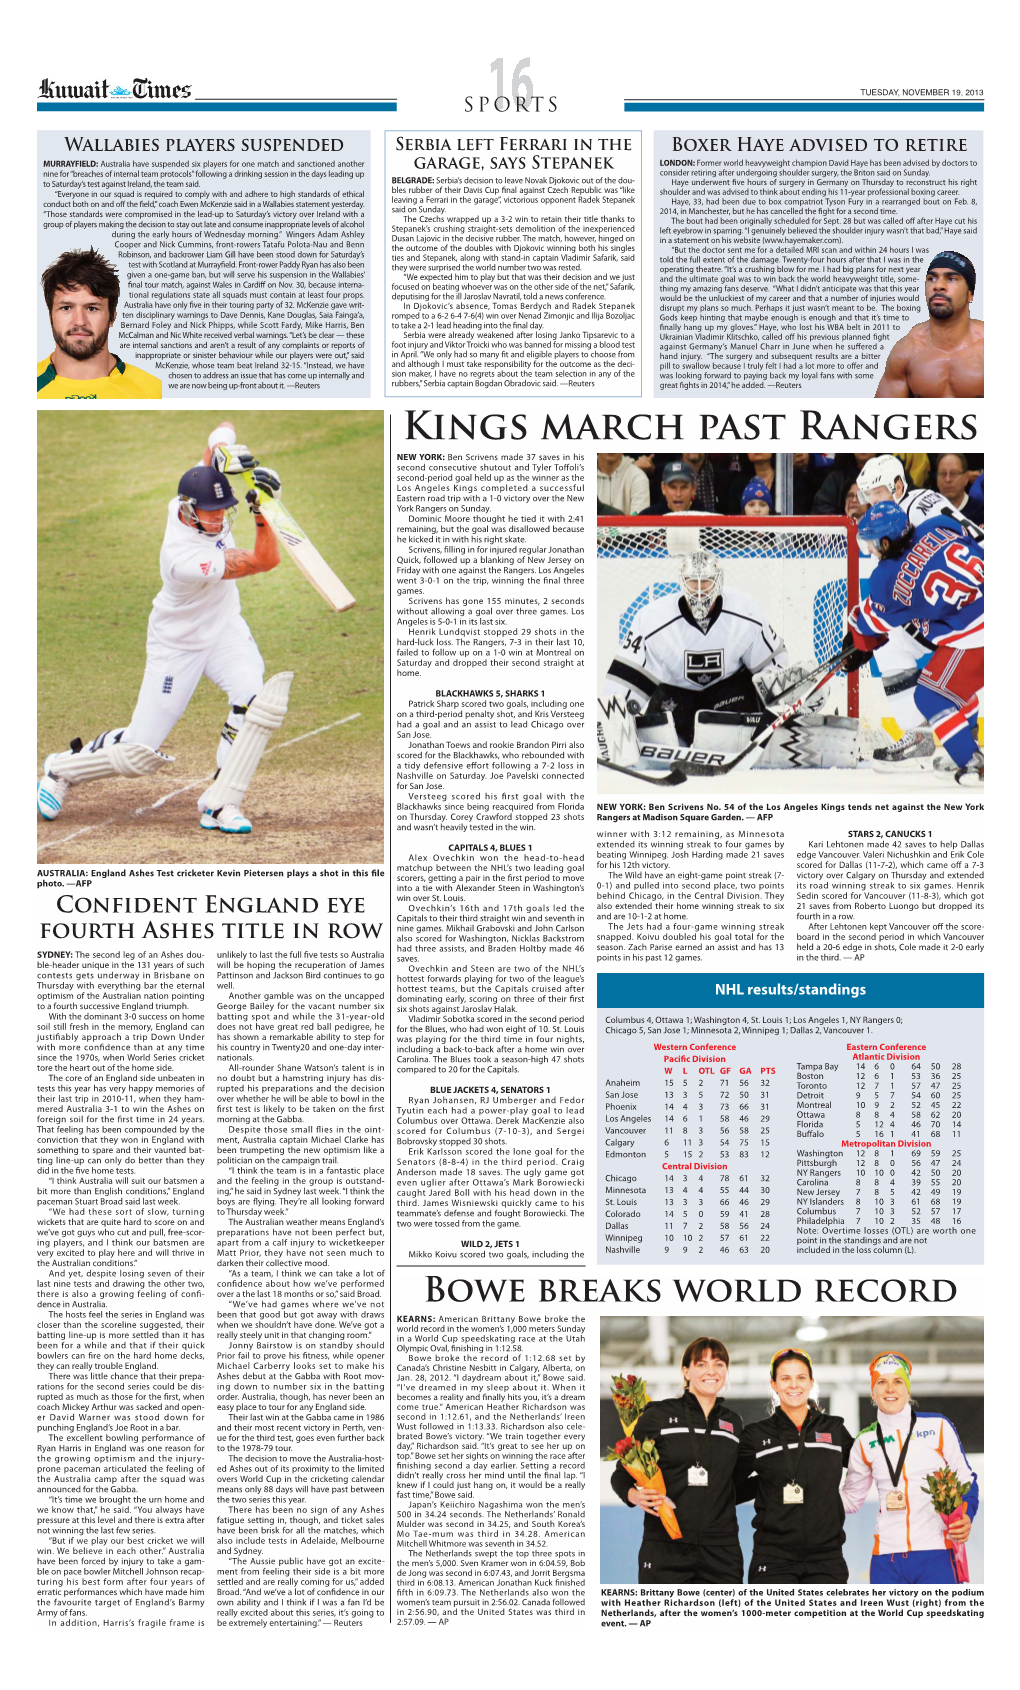 Kings March Past Rangers